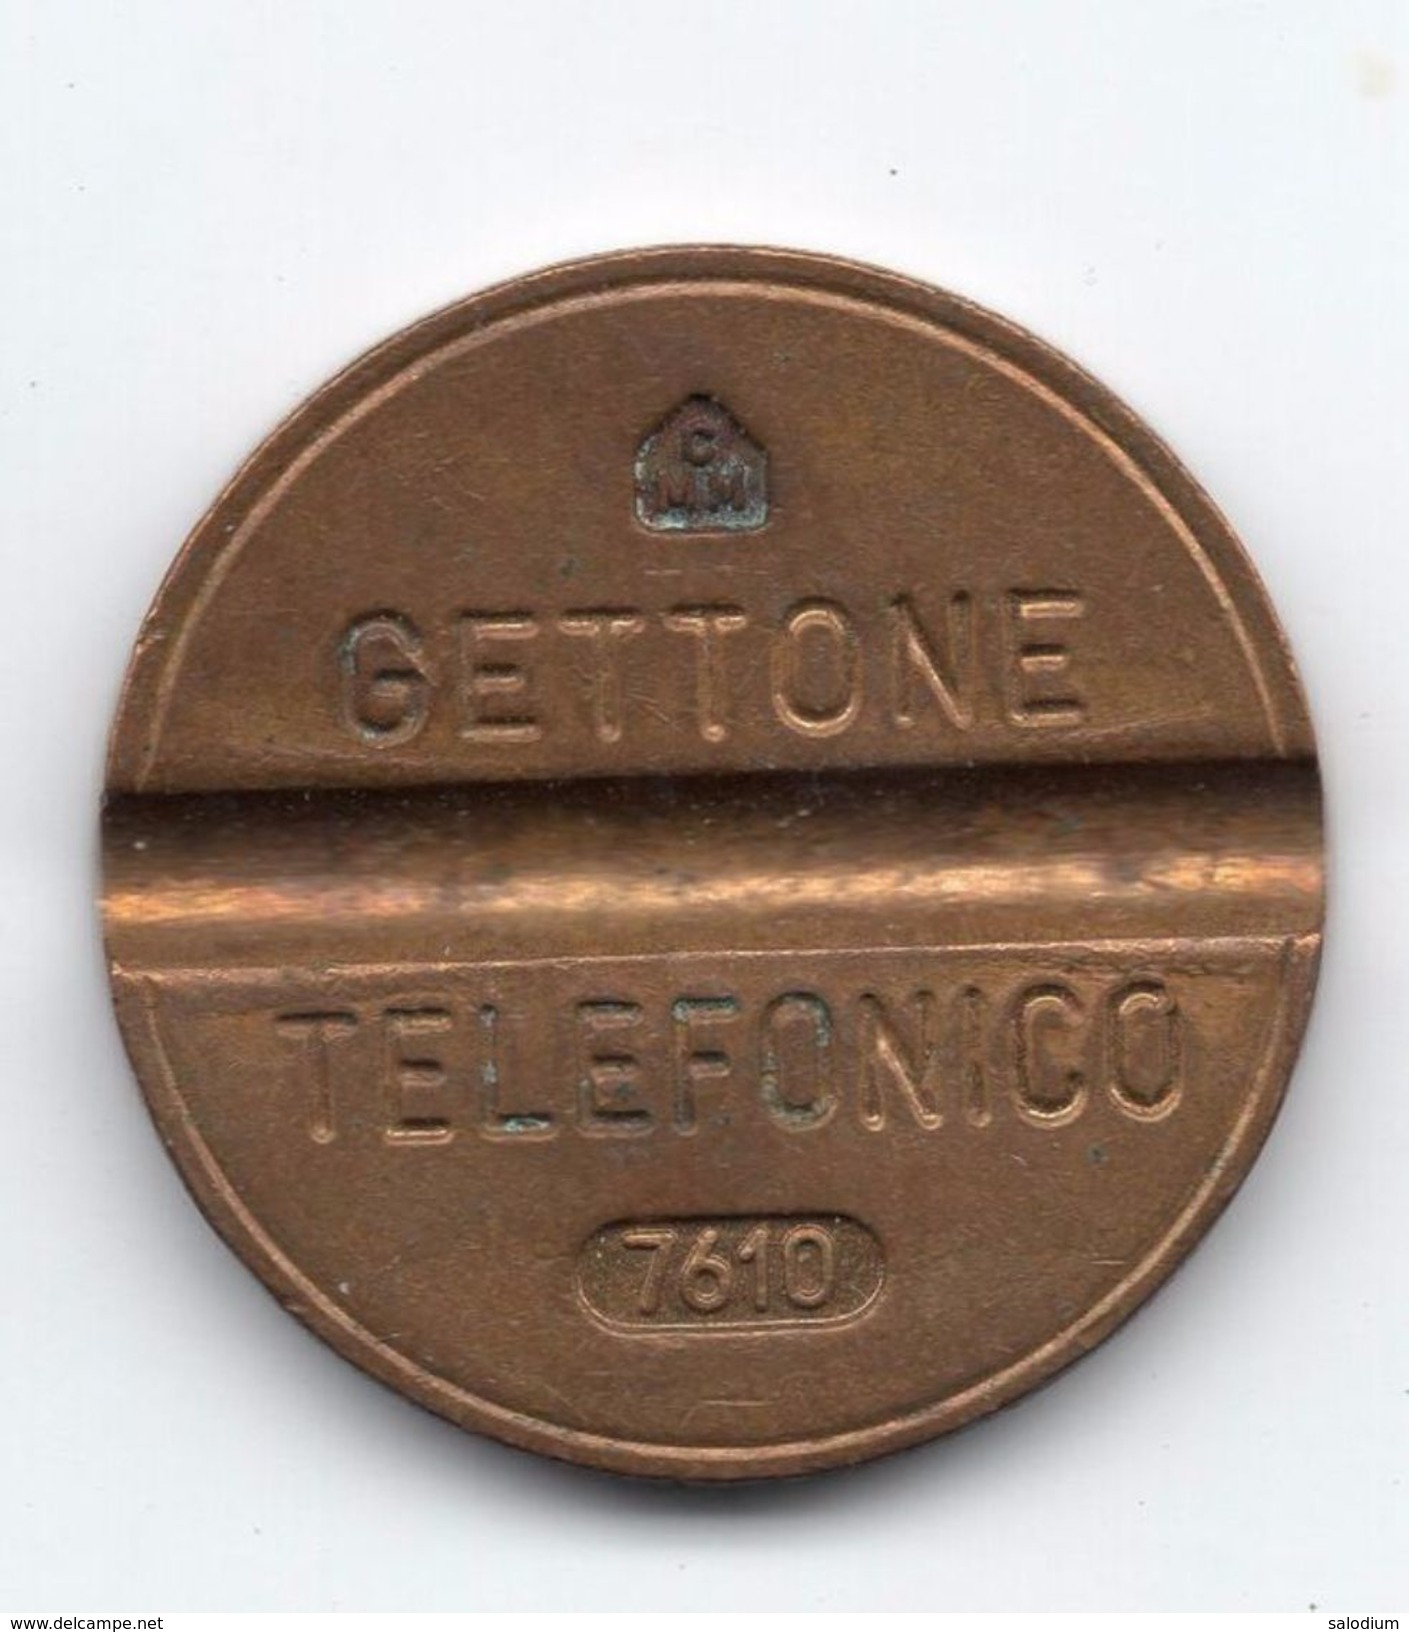 Gettone Telefonico 7610  Token Telephone - (Id-753) - Professionals/Firms